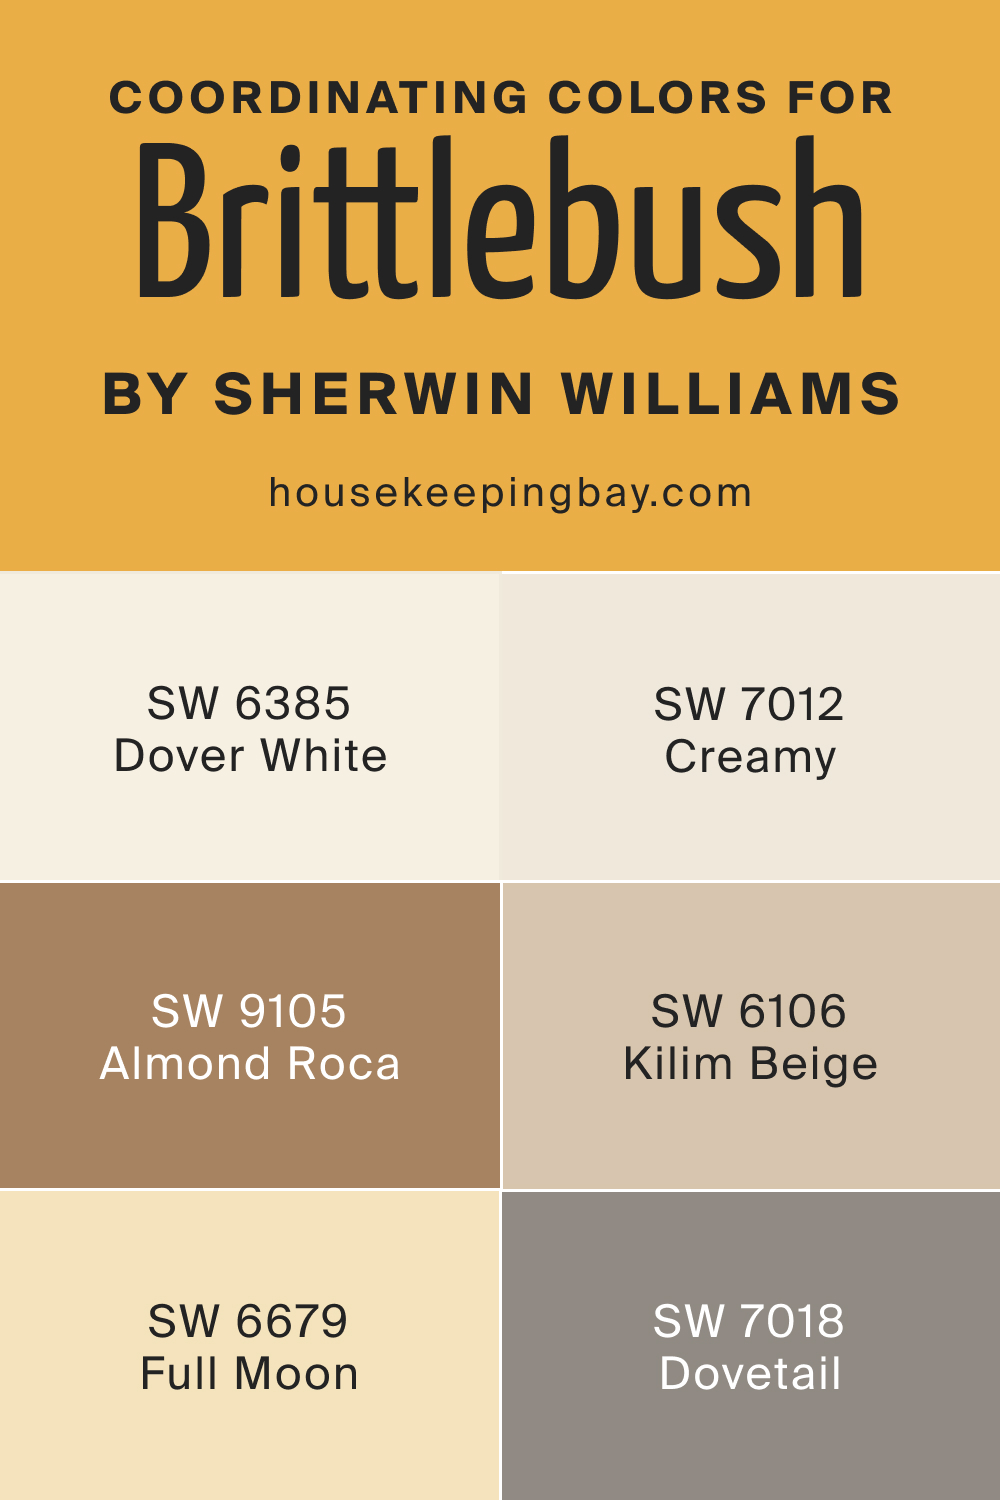 Coordinating Colors for Brittlebush SW 6684 by Sherwin Williams